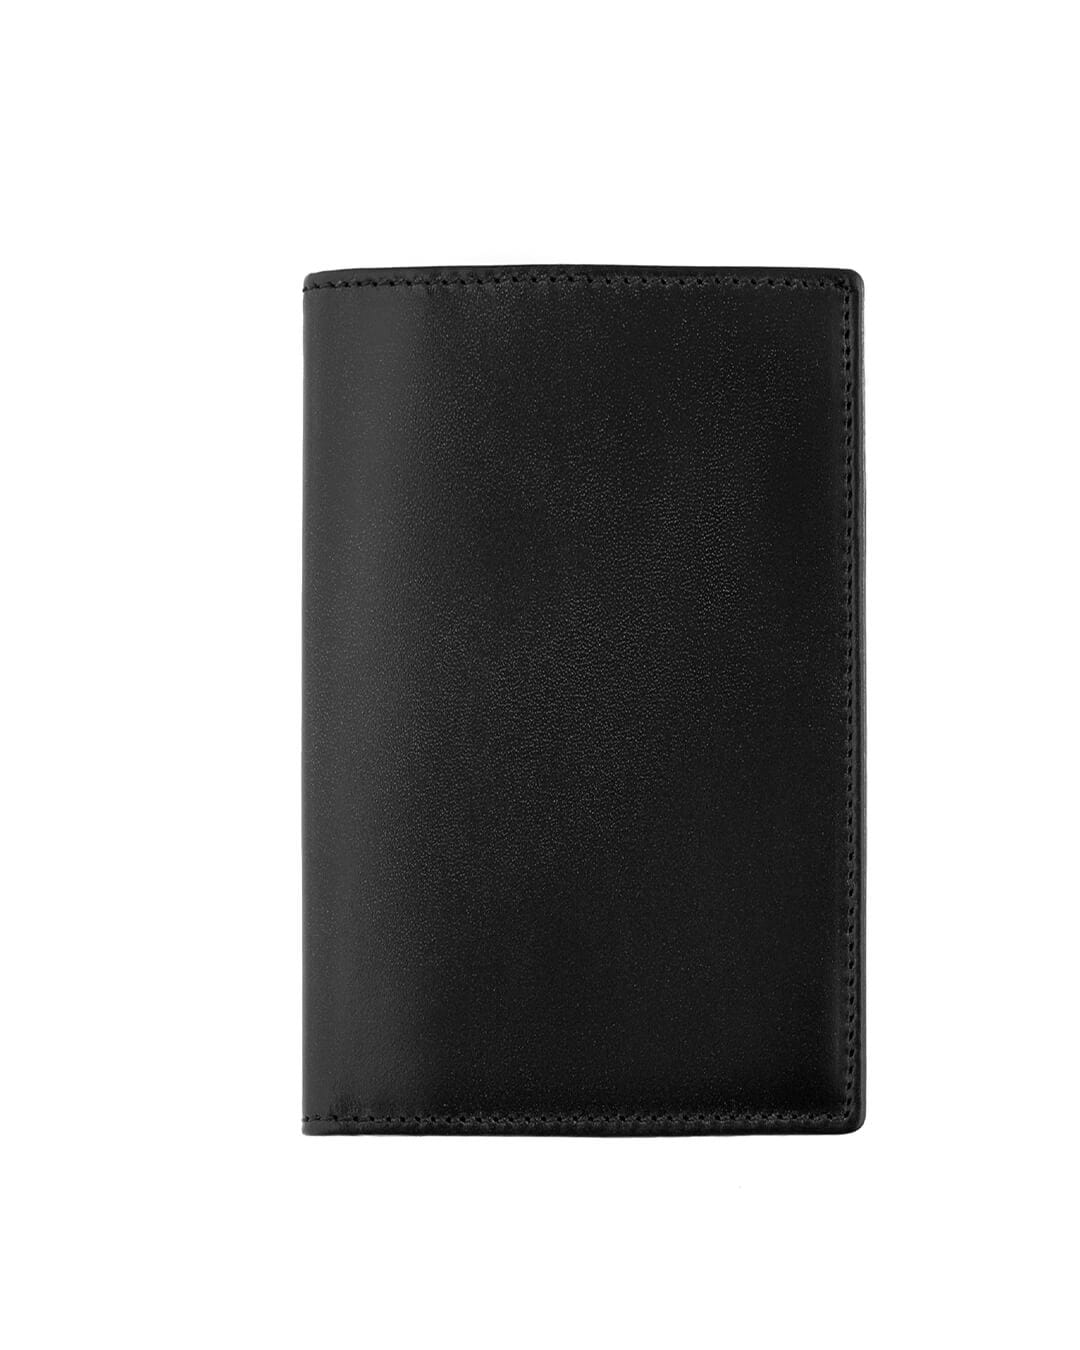 Cavesson's Wallets Cavesson's Black And Red Card Wallet